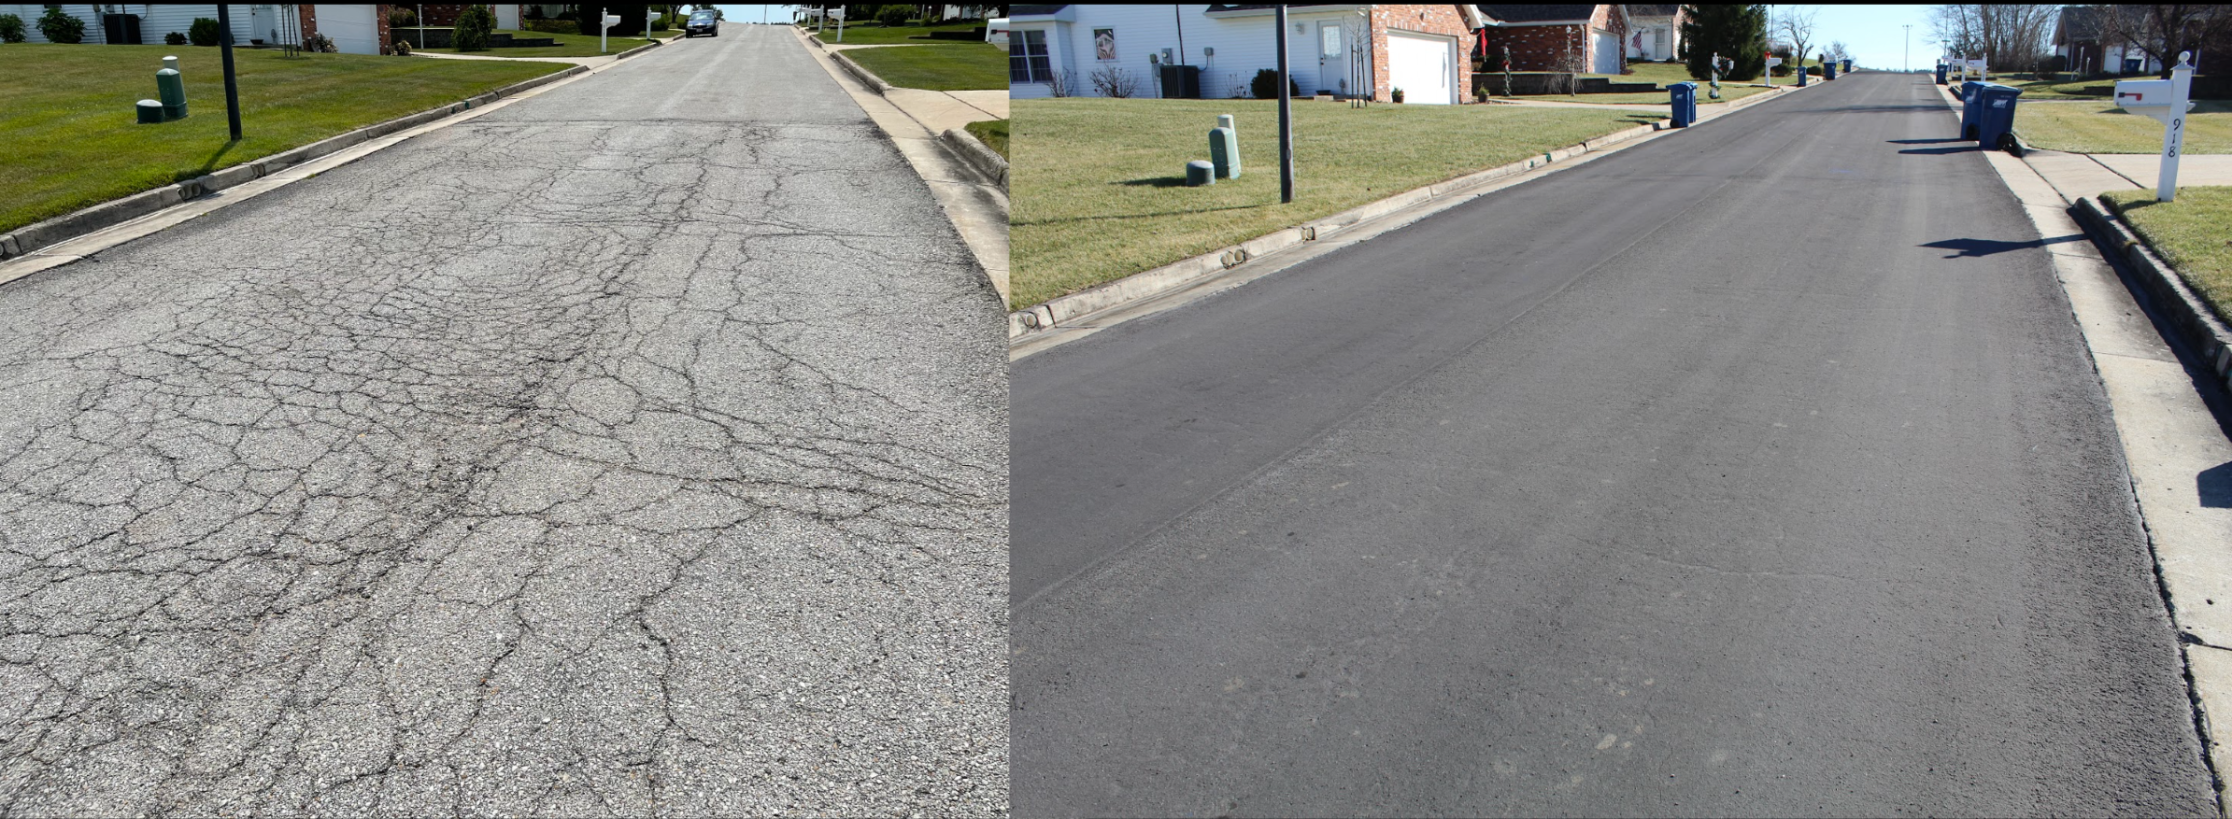 Before PressurePave (LEFT), After 1 year of PressurePave (RIGHT)